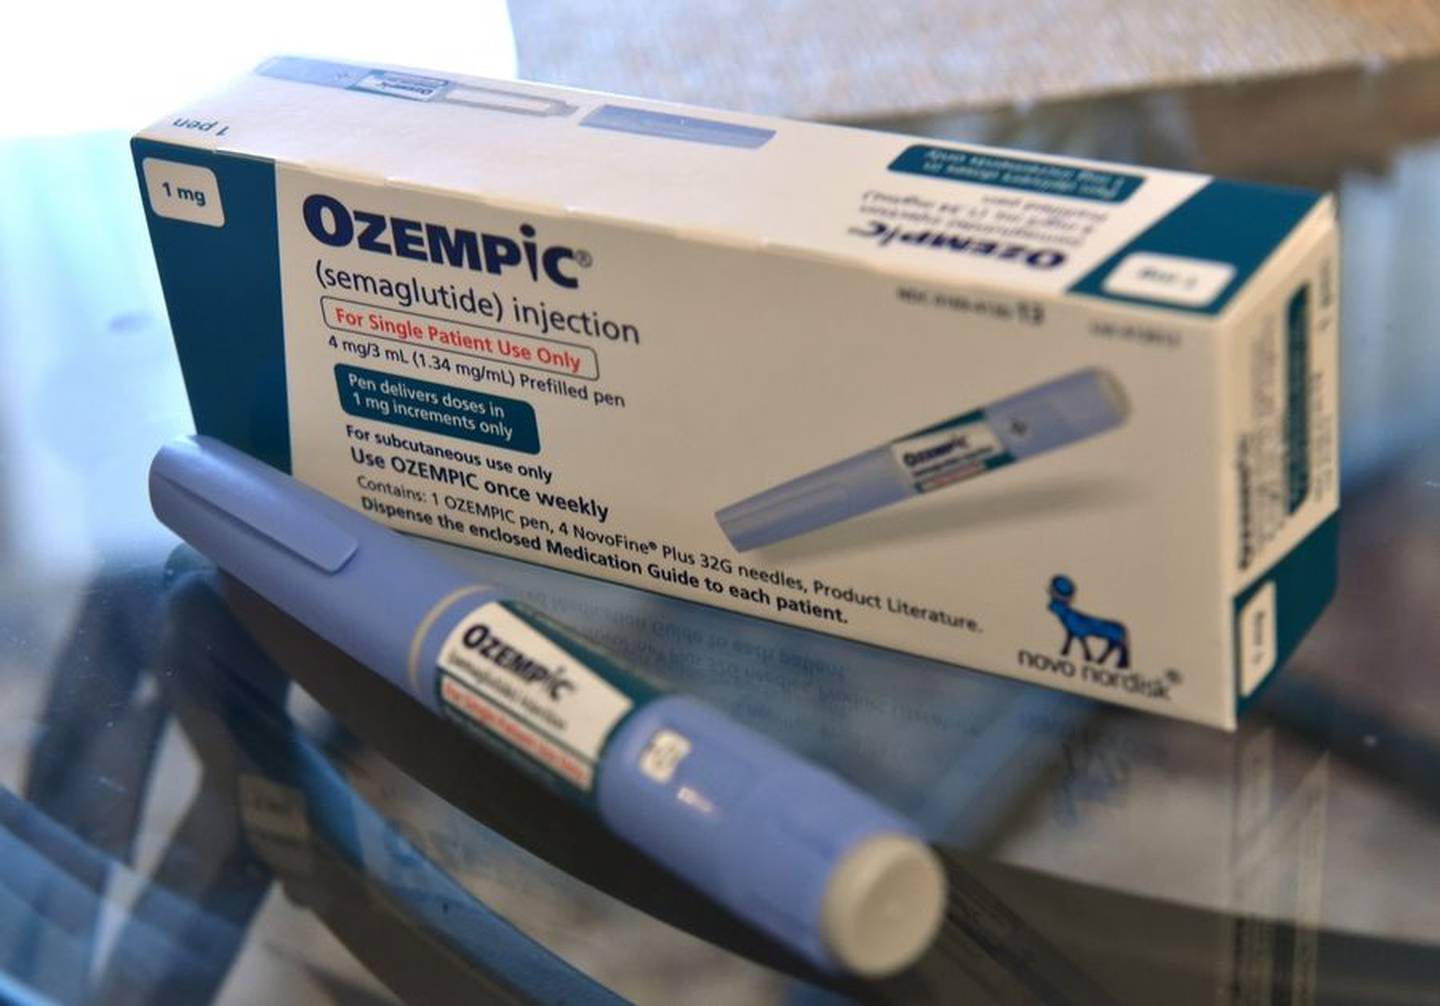 Ozempic is used to treat Type 2 diabetes, but patients have struggled to find it.